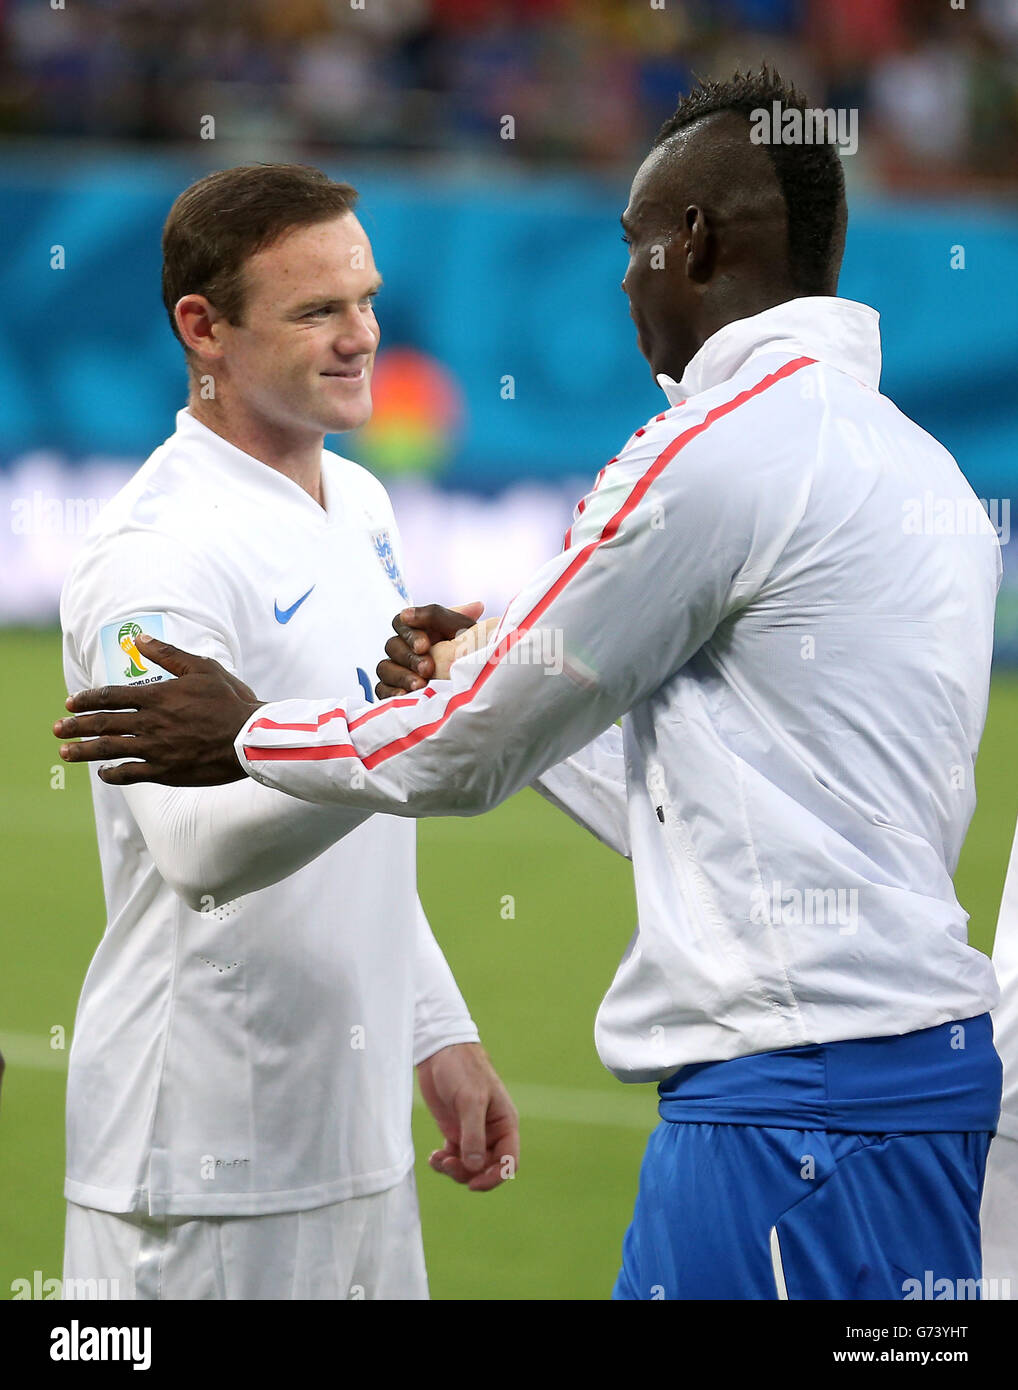 Italy's Mario Balotelli shakes hands with England's Wayne Rooney before the FIFA World Cup, Group D match at the Arena da Amazonia, Manaus, Brazil. Stock Photo